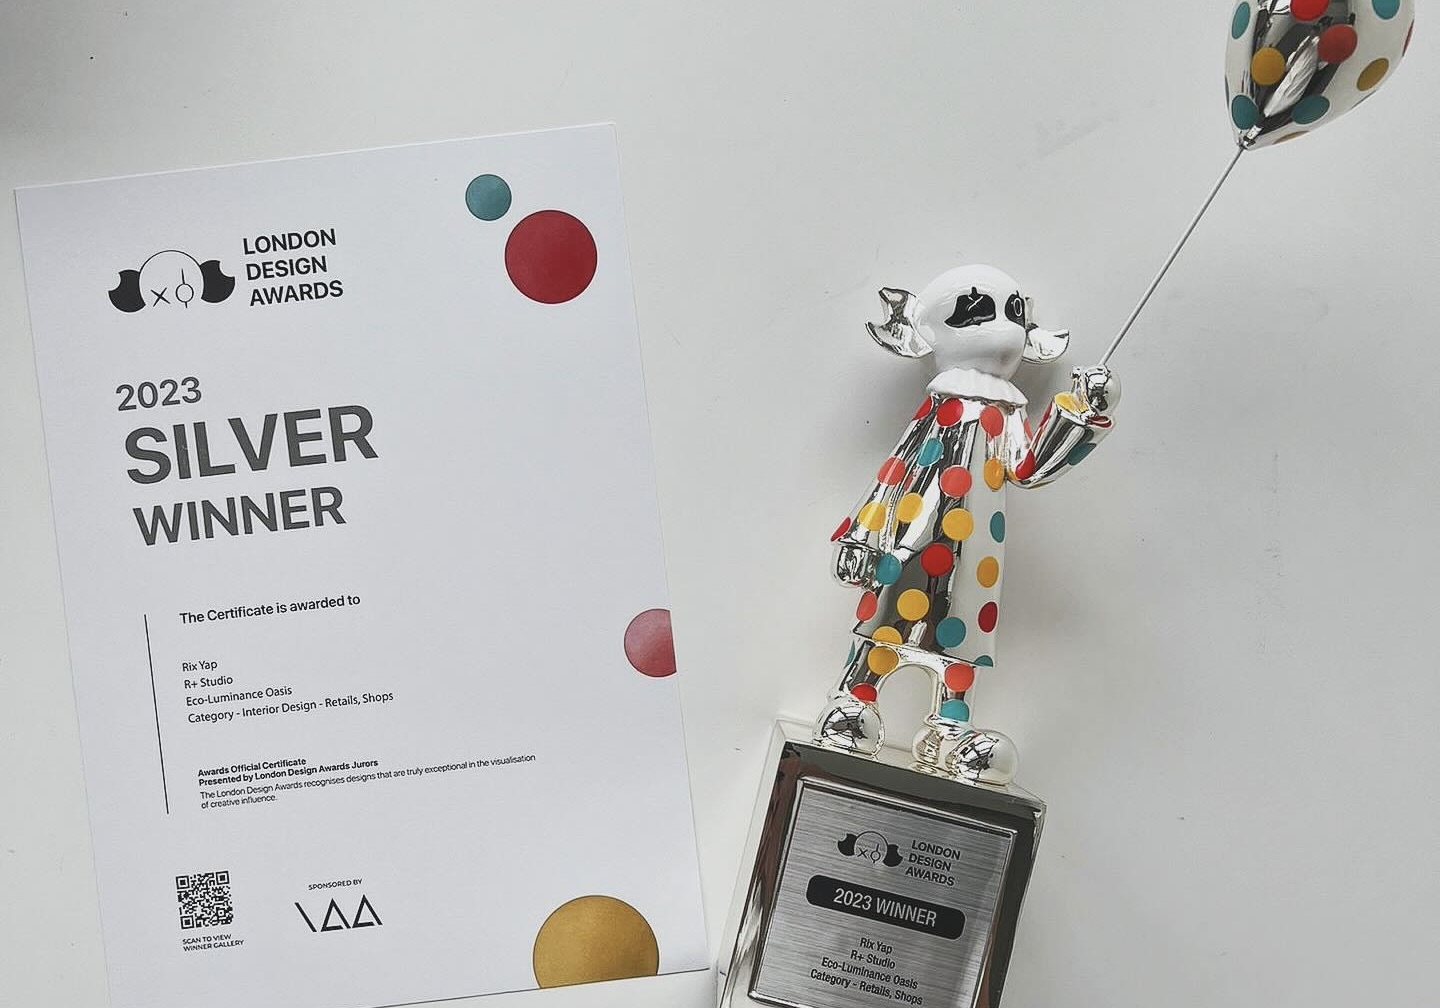 R+ Studio has won a Silver Award at the 2023 London Design Awards for their work in the Interior Design category!